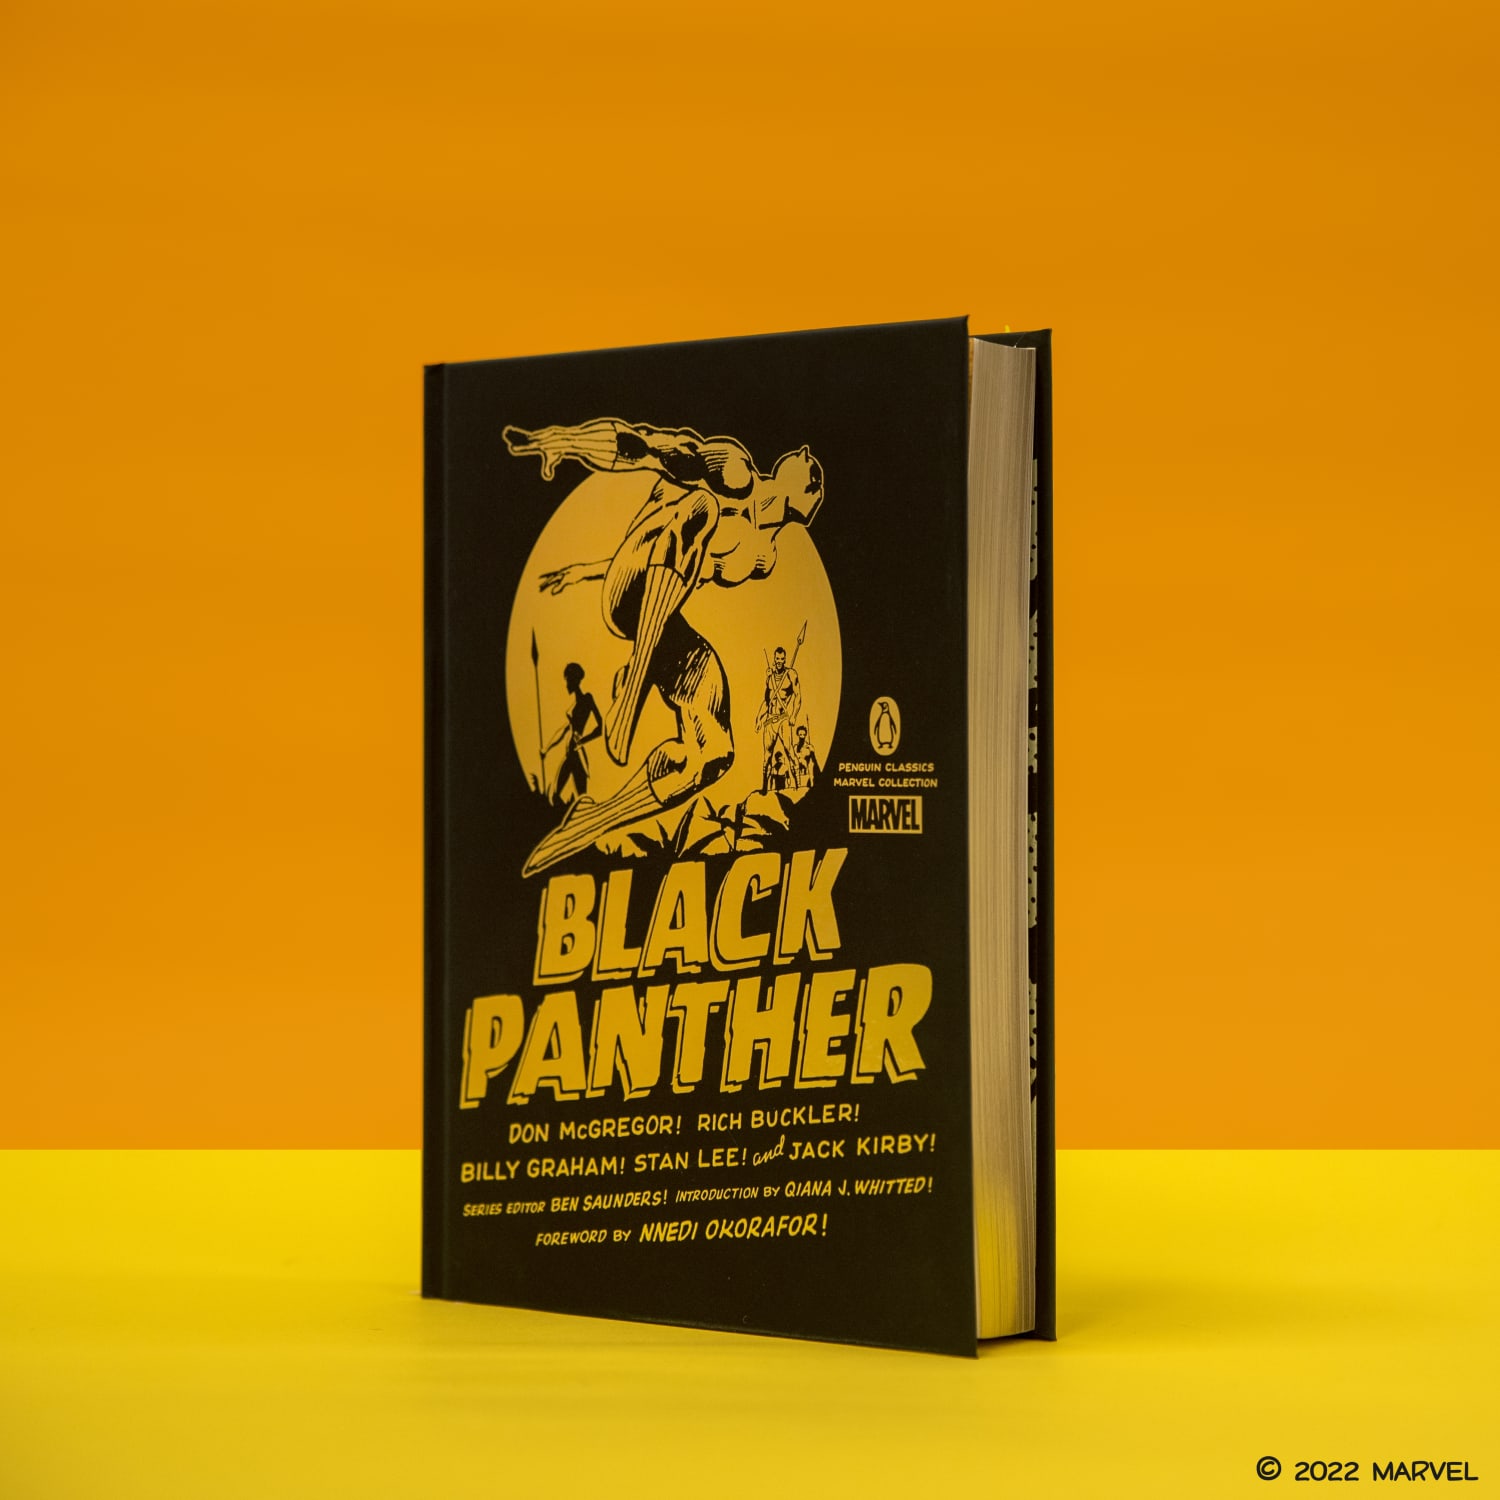 Black Panther hardcover edition standing against orange background